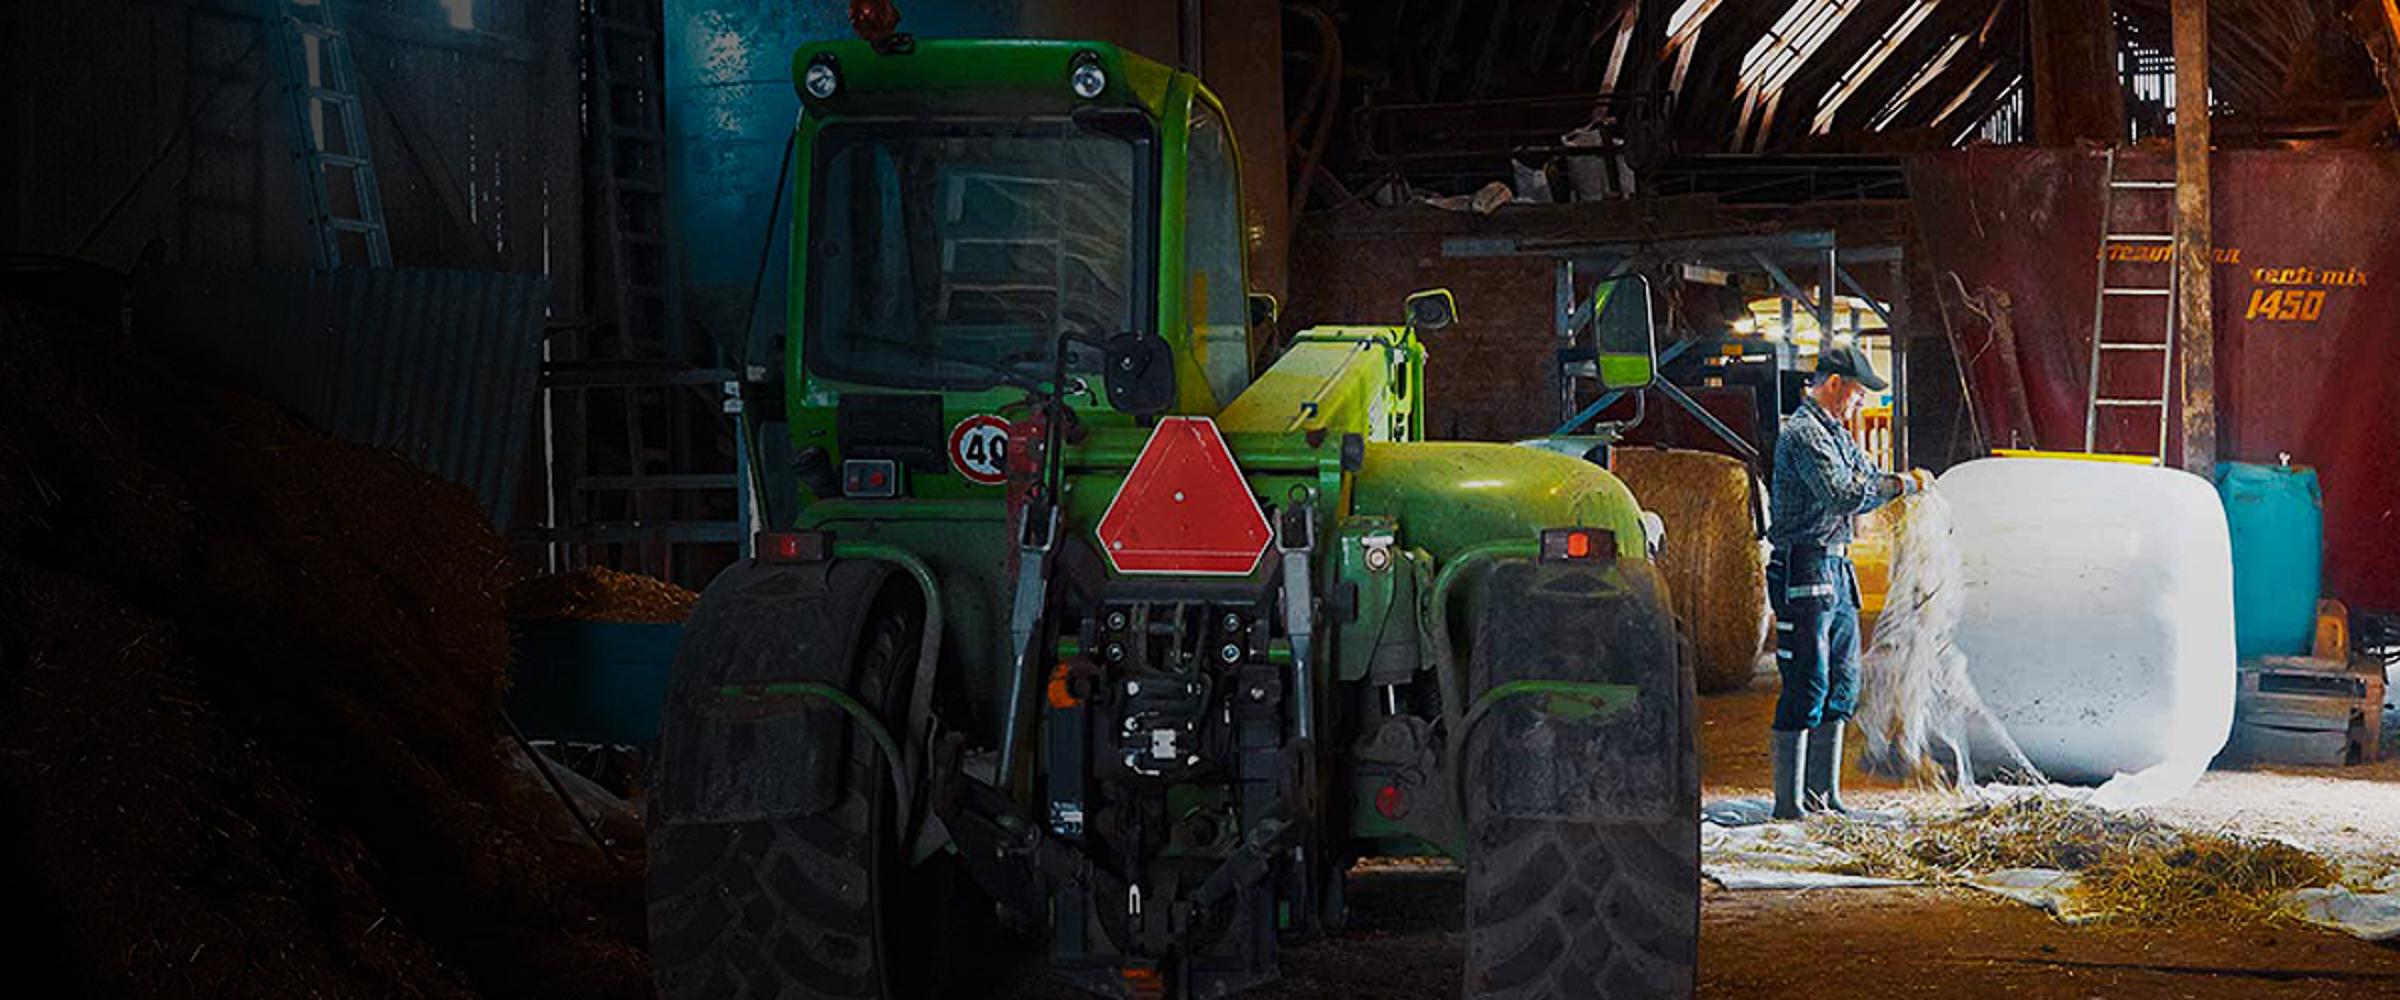 A farmer next to his tractor in a barn